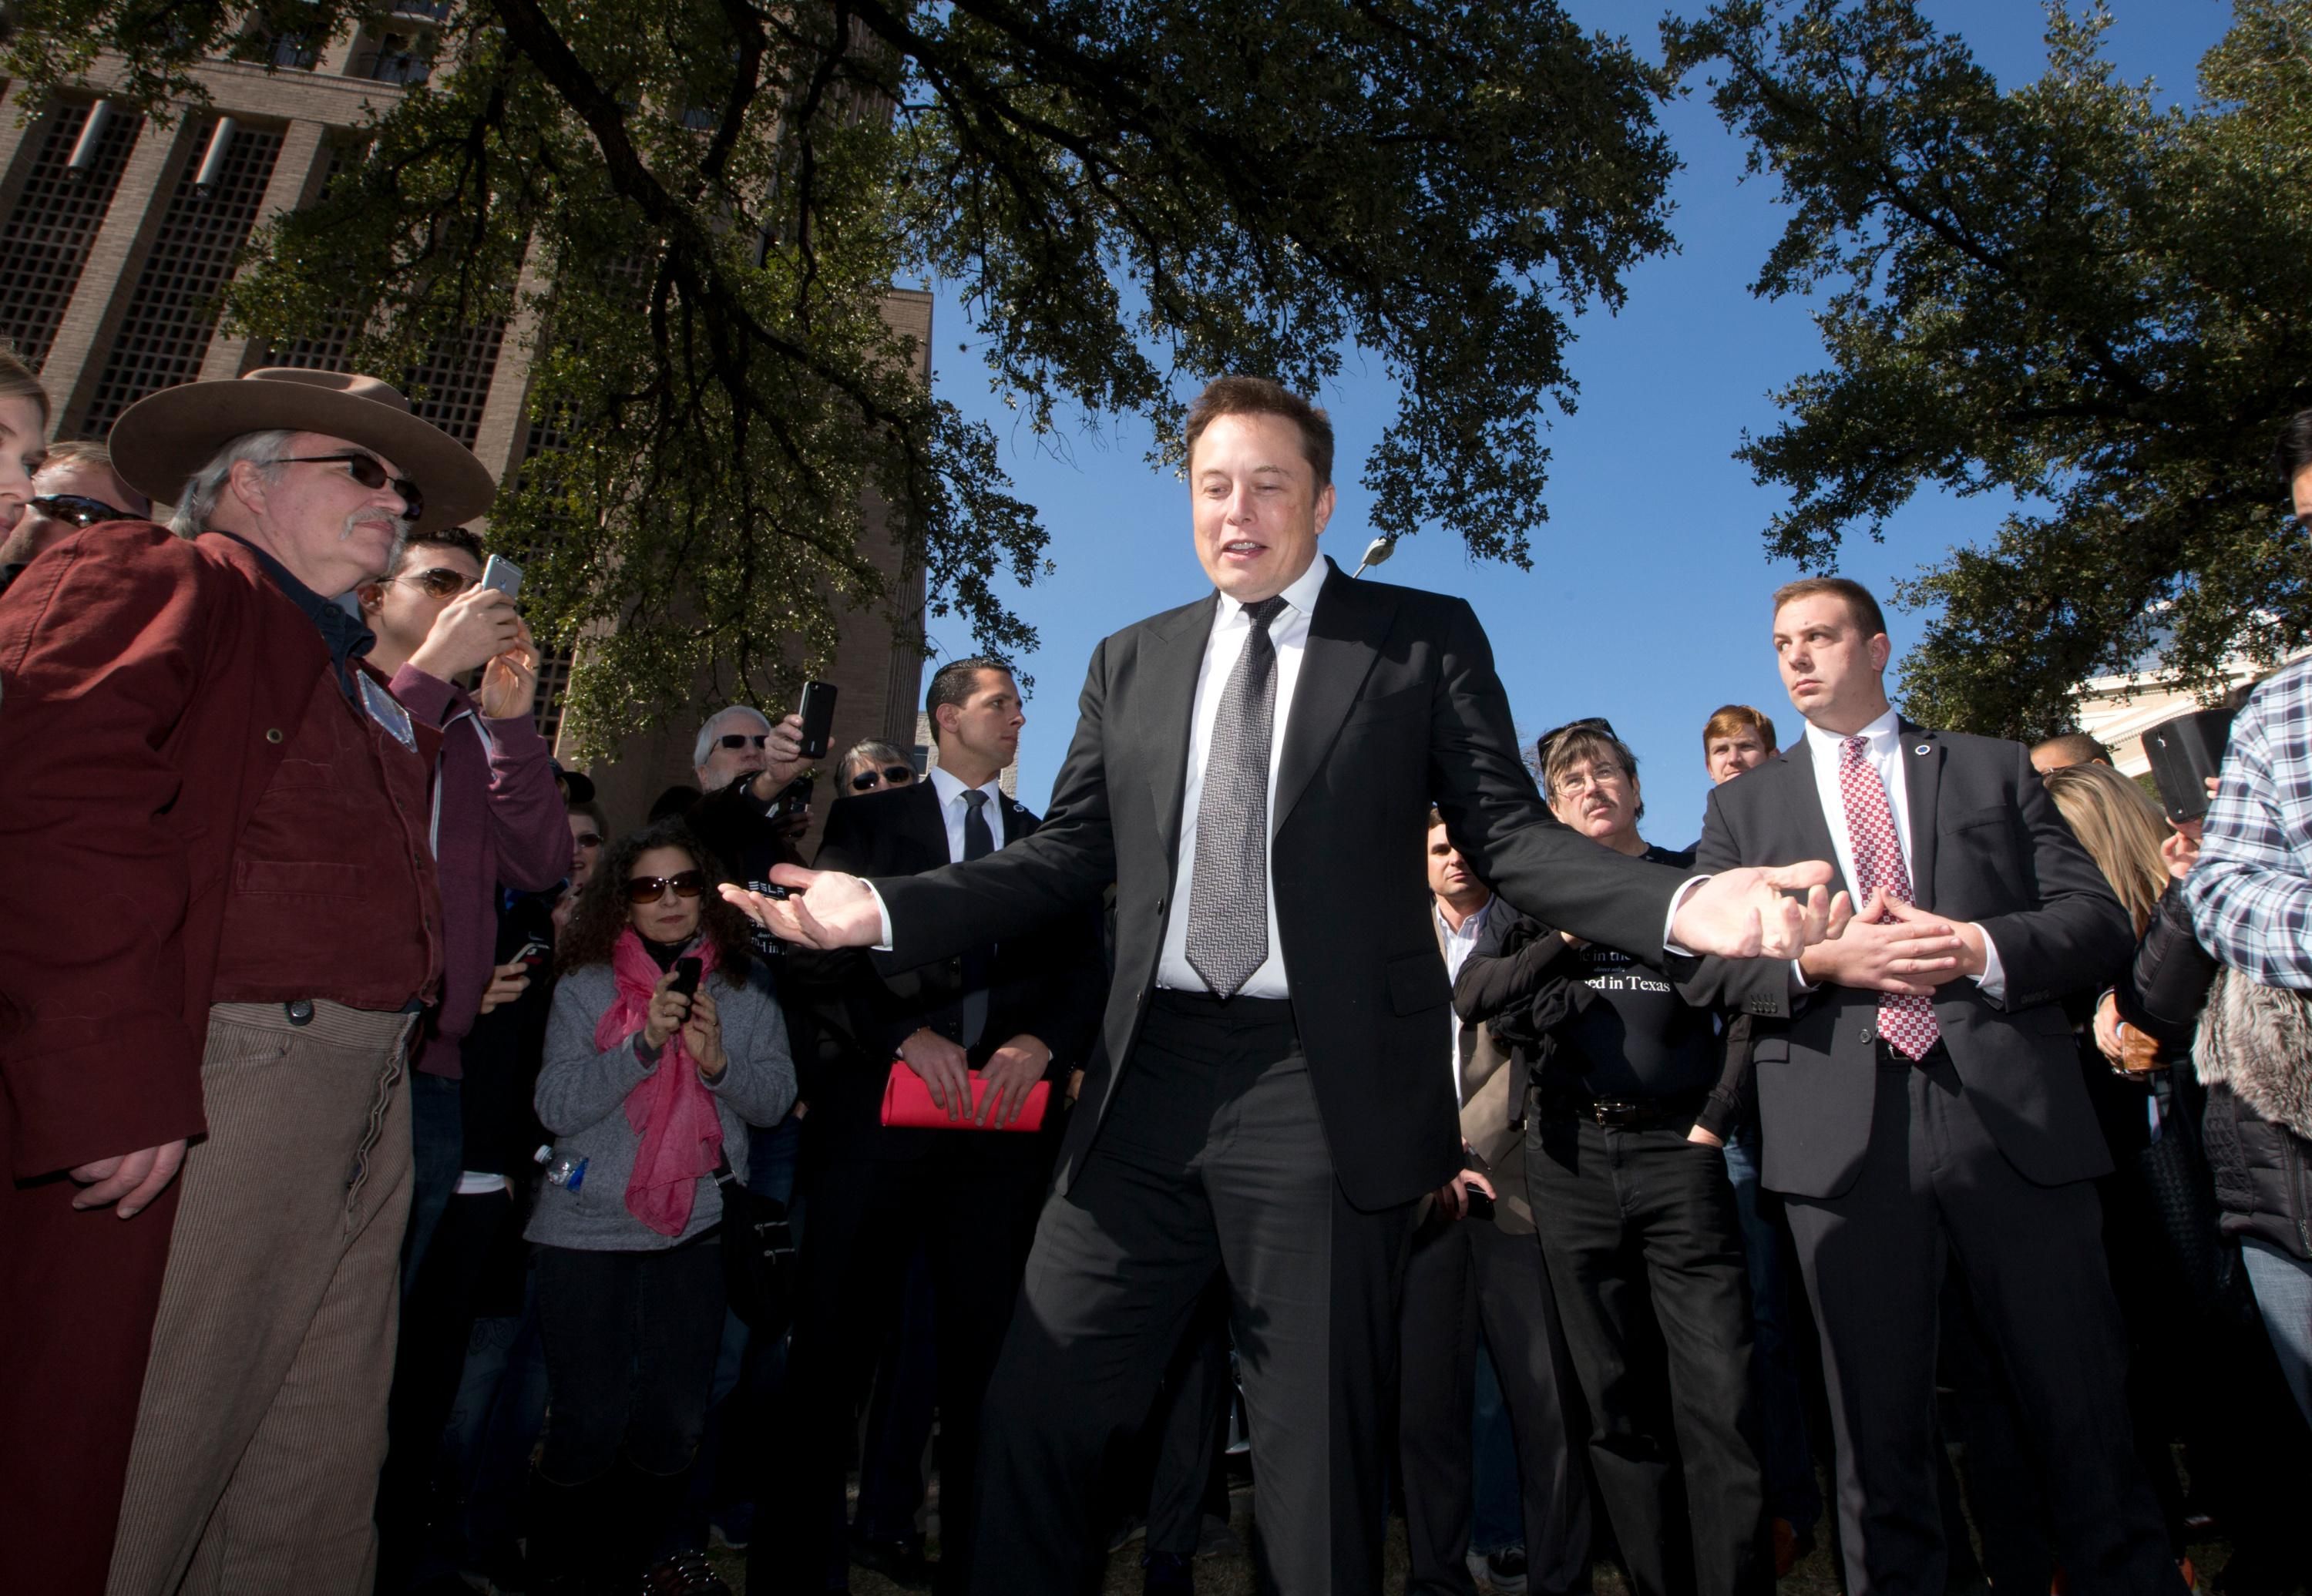 CEO of Tesla Motors and SpaceX, Elon Musk speaks to a crowd of people who had gathered to participate in Tesla Motors test drives outside the Texas Capitol building in Austin